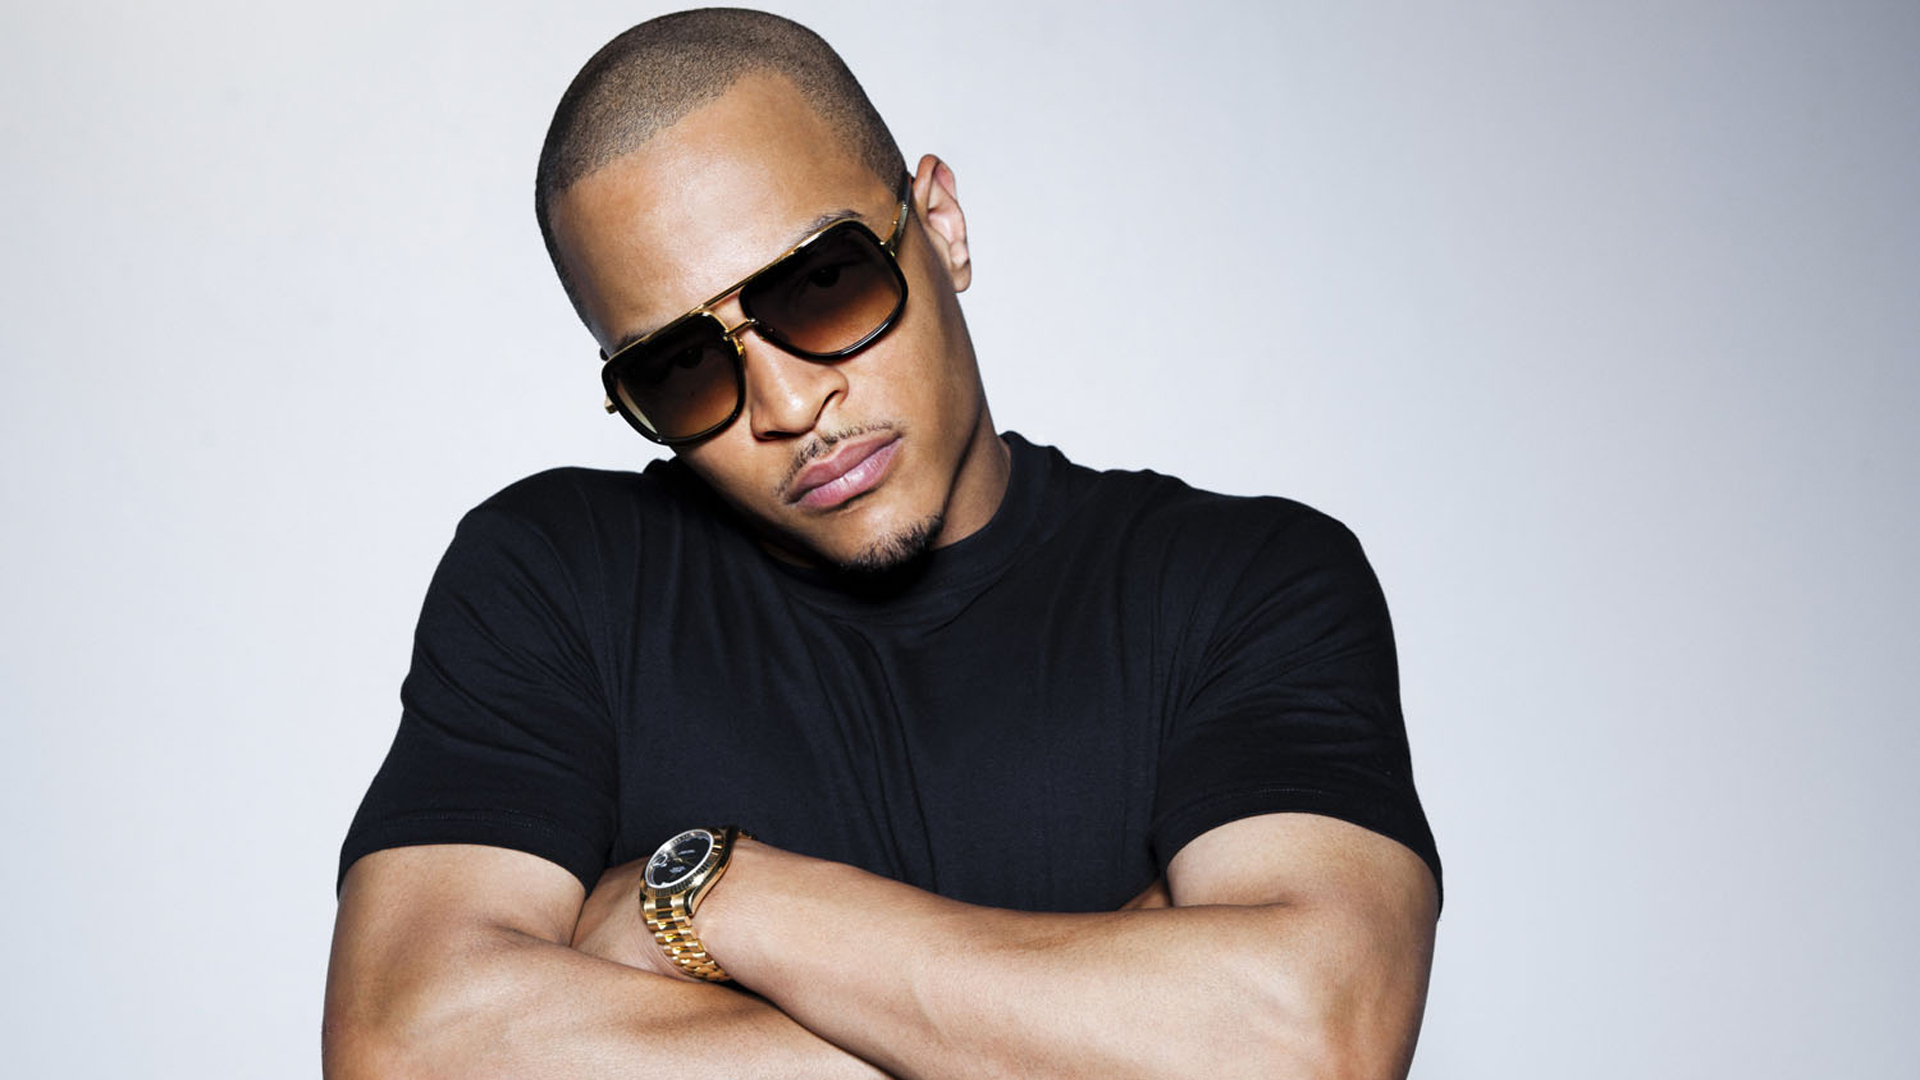 Have you no heart? Leave T.I out of this – what has he done to you?